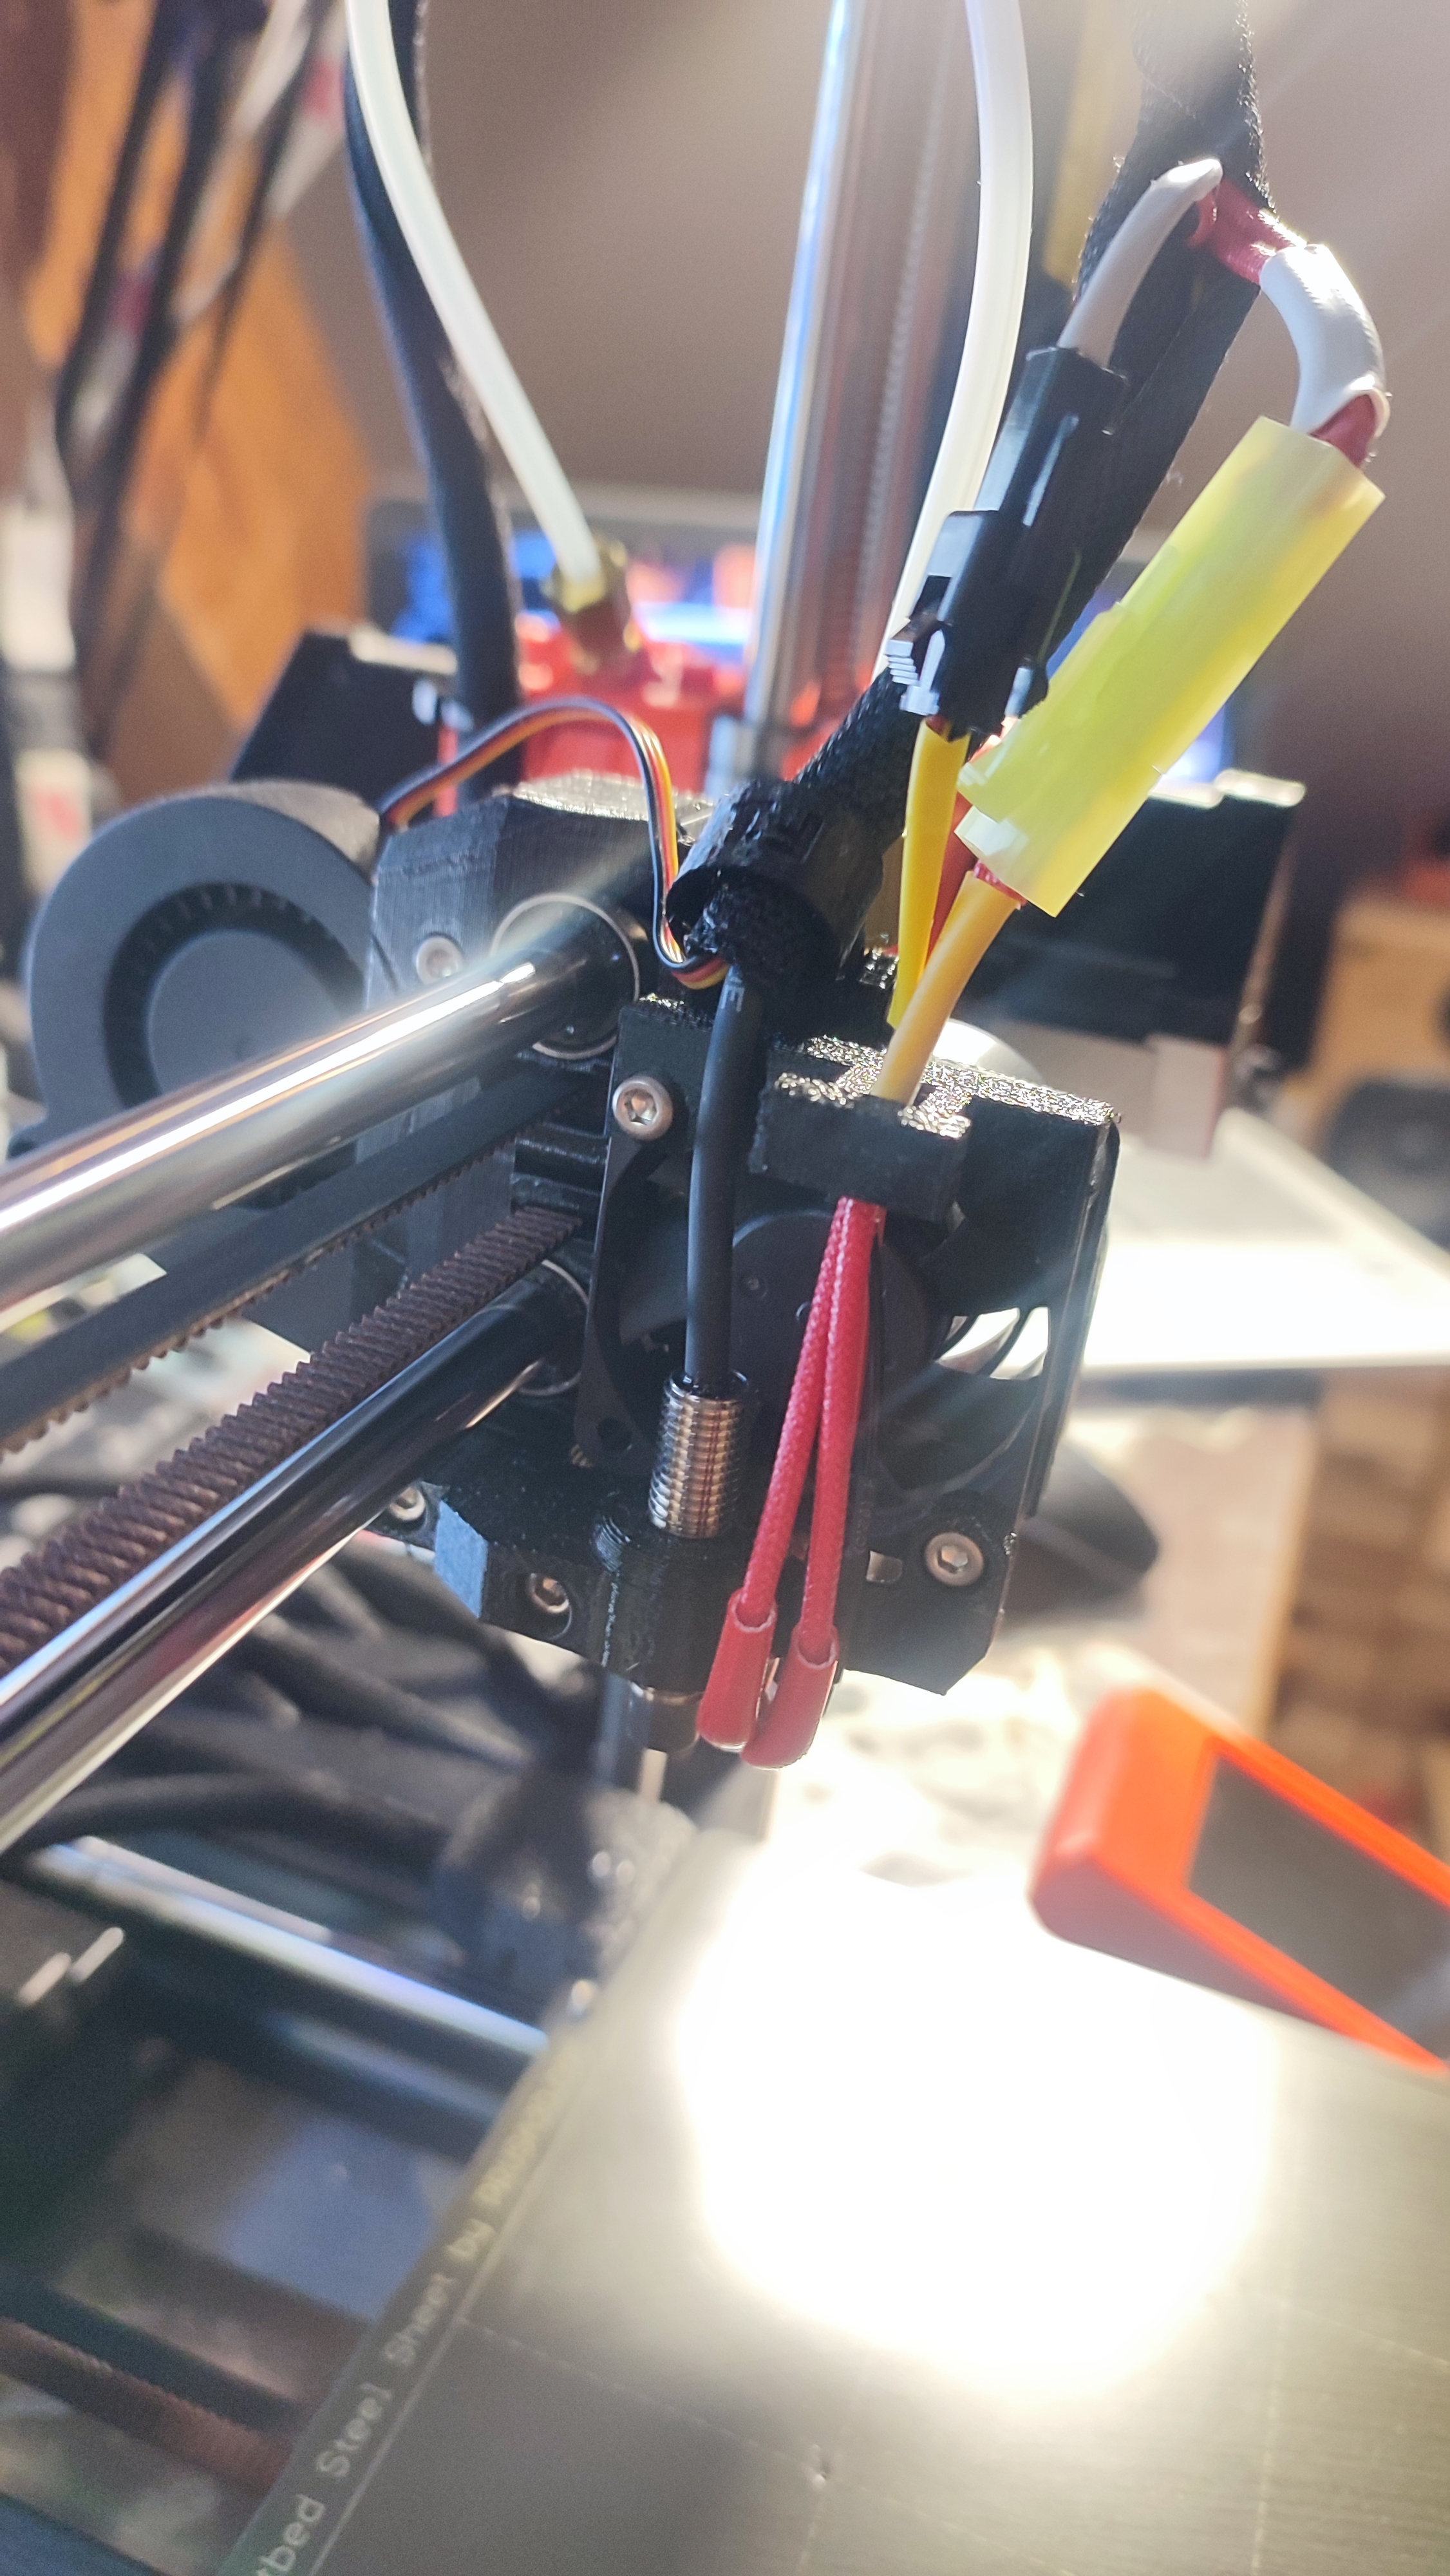 Prusa mini hotend connector / cable holder